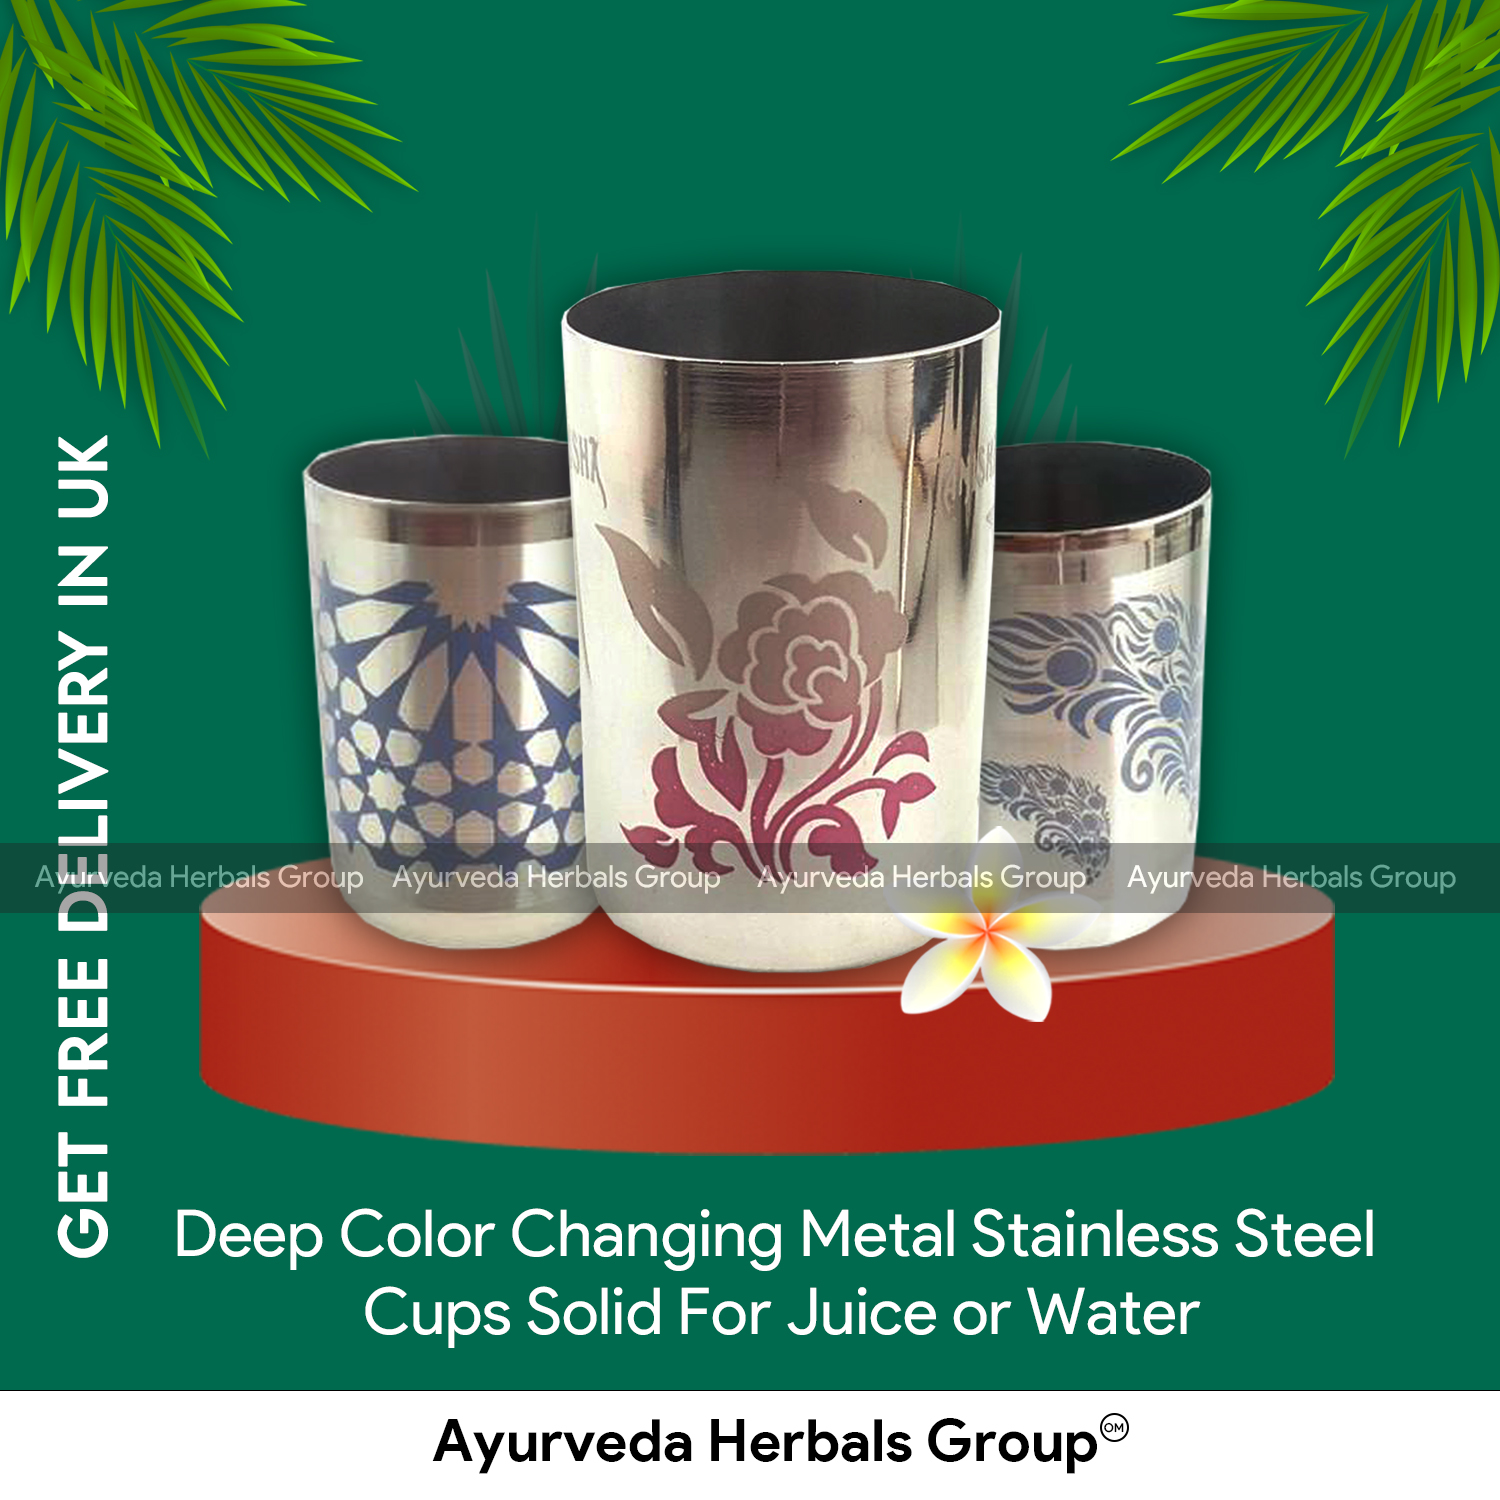 Deep Color Changing Metal Stainless Steel Cups Solid For Juice or Water